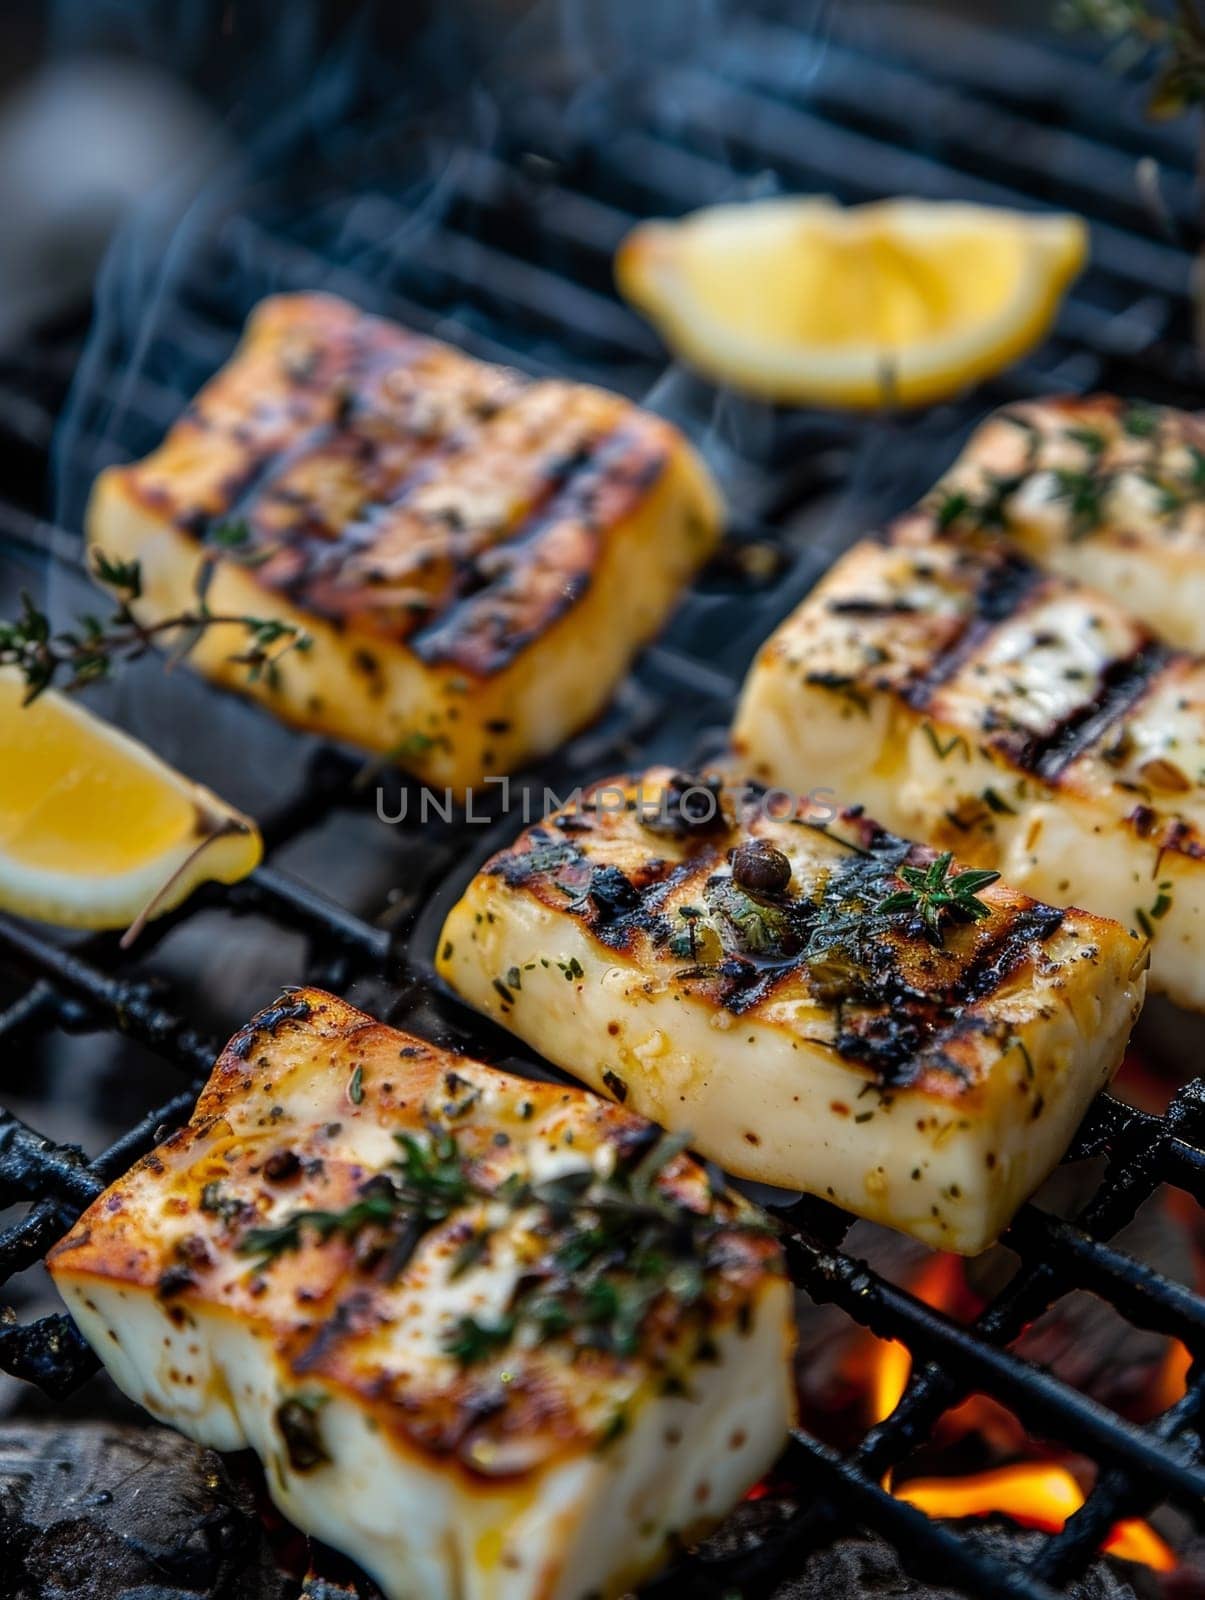 Authentic Cypriot halloumi cheese, grilled to perfection and served with fresh lemon wedges and a drizzle of fragrant olive oil - a mouthwatering representation of the rich culinary traditions